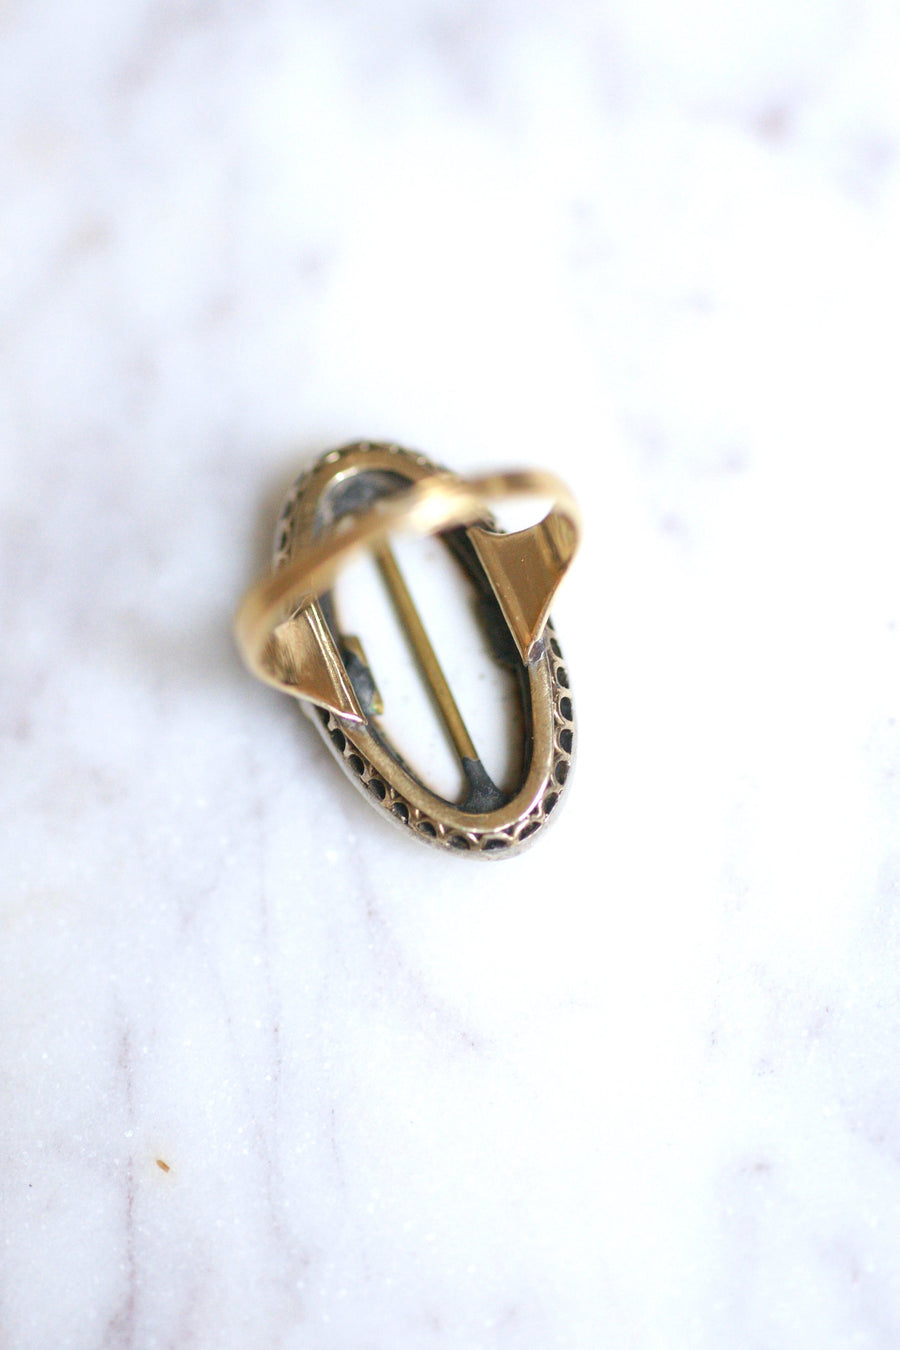 Antique gold and silver ring, miniature on porcelain - Galerie Pénélope